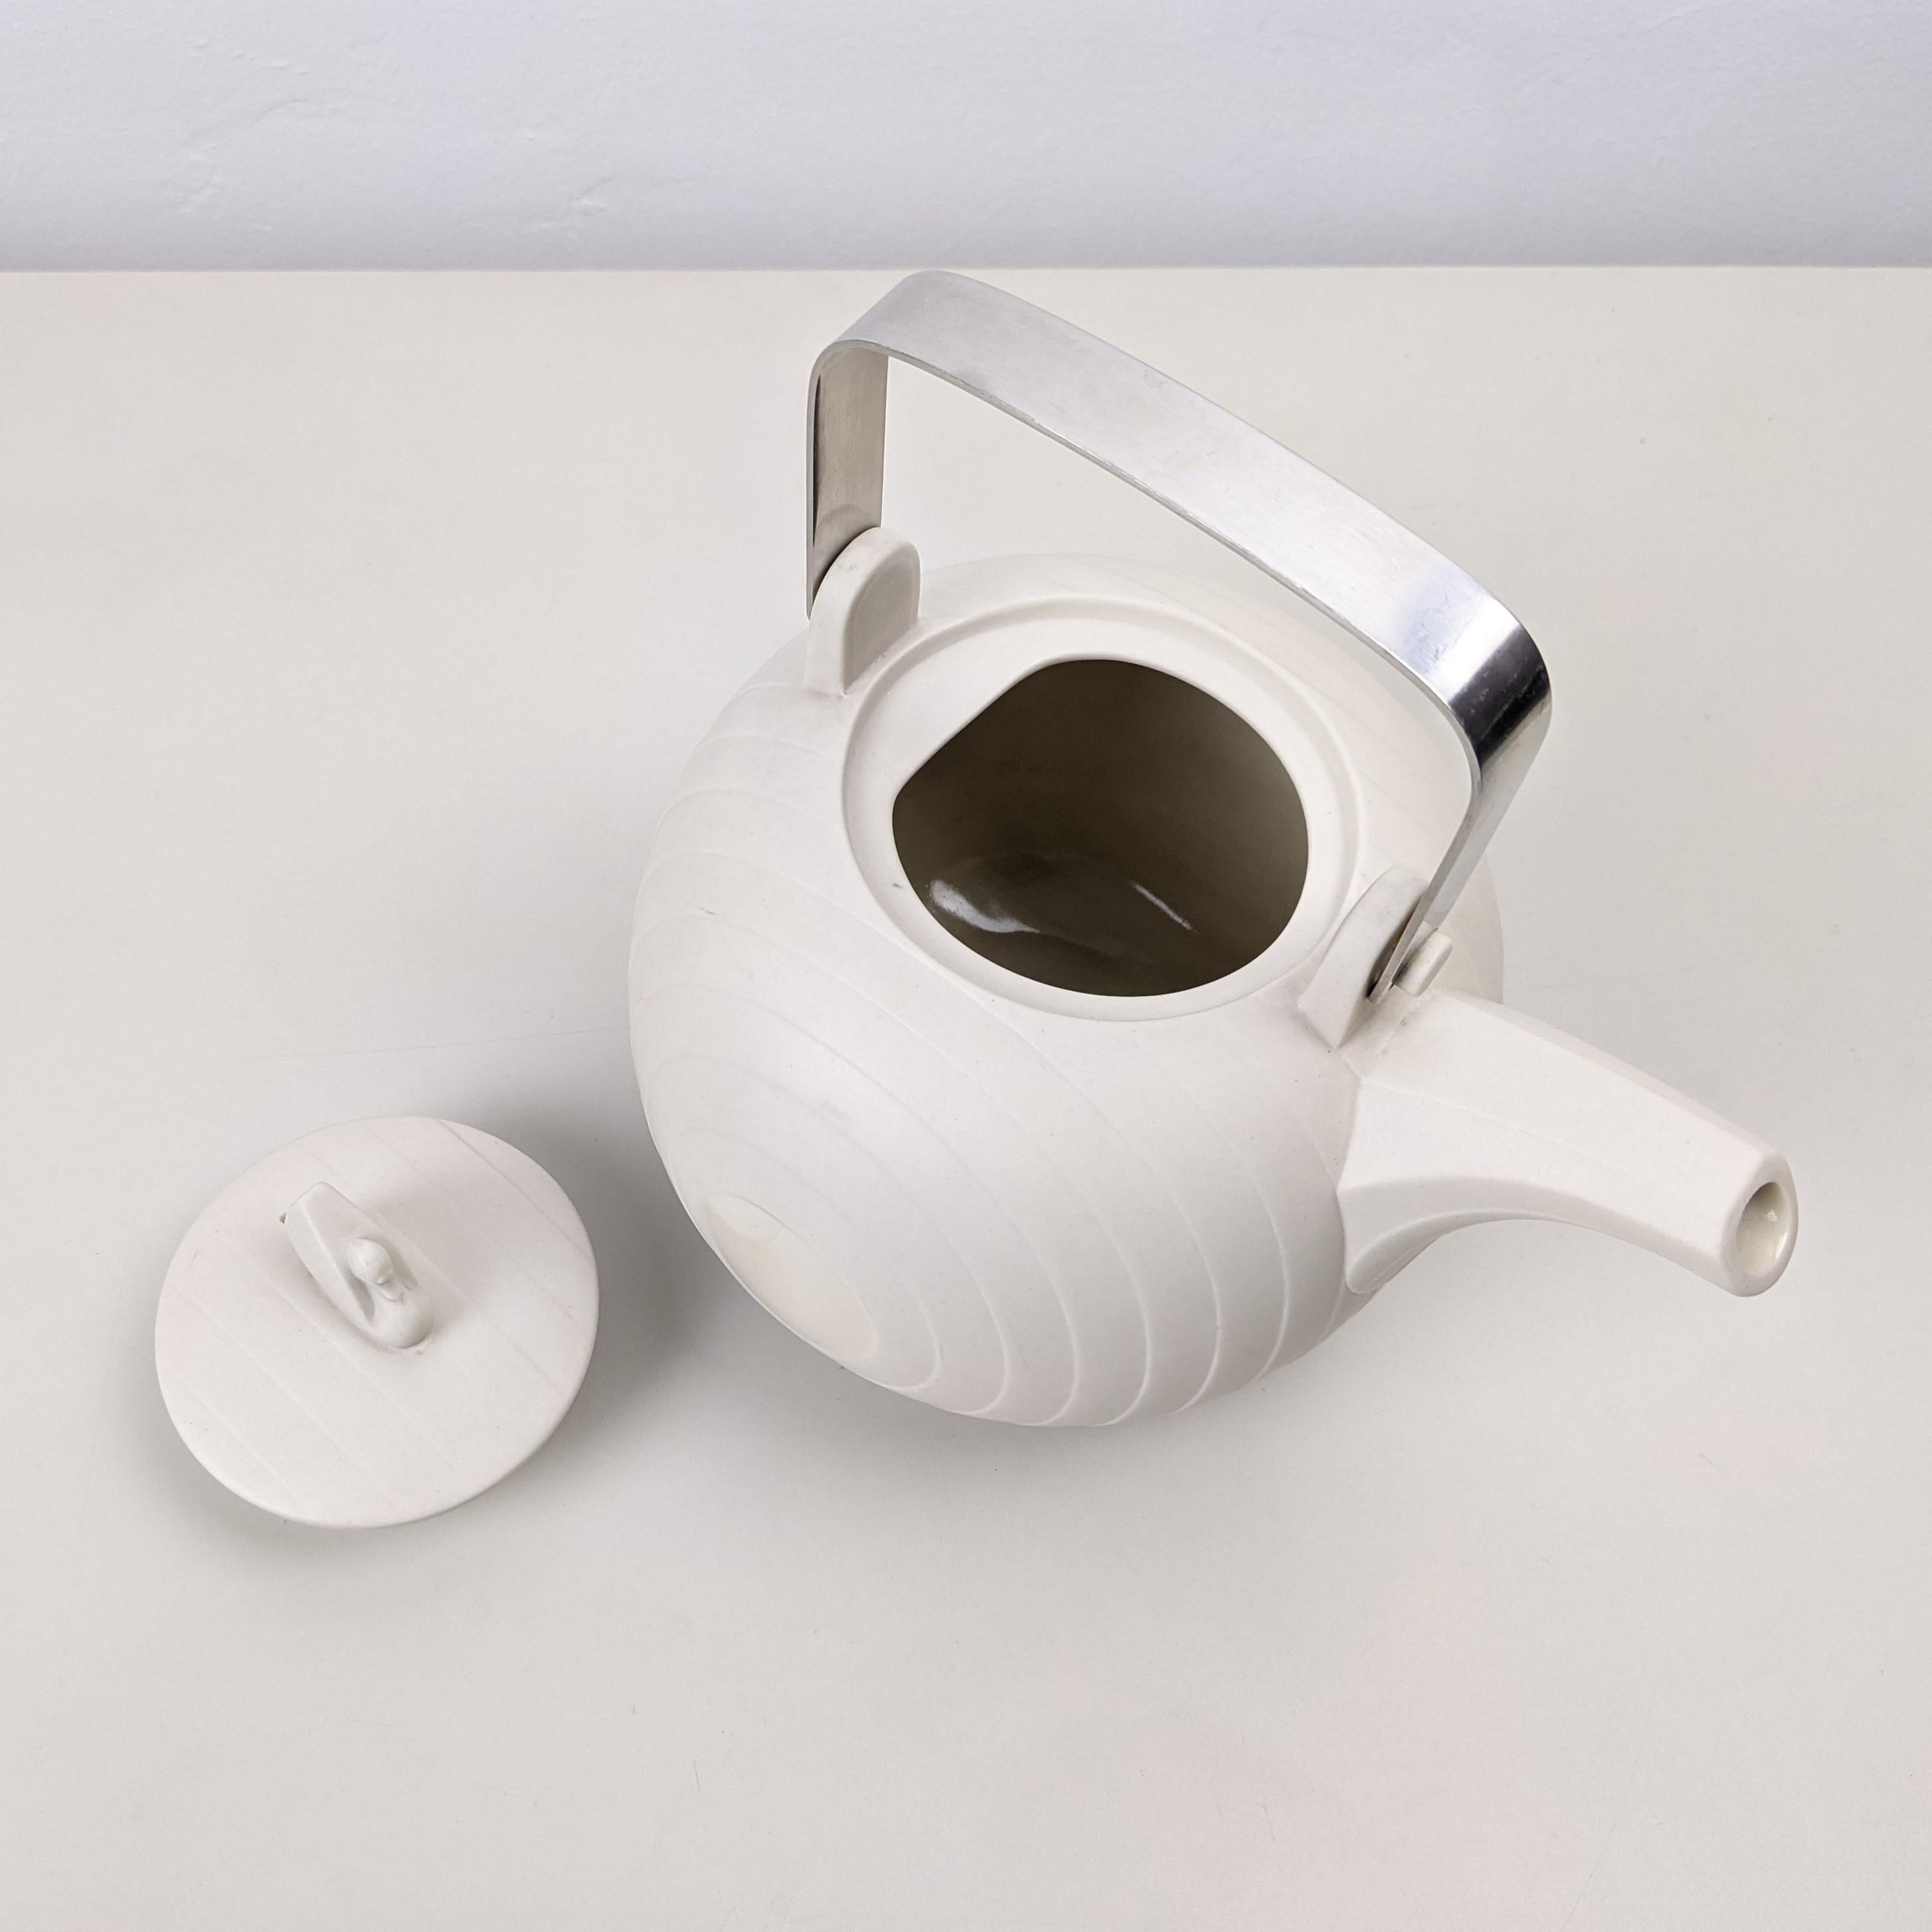 Mid-Century Modern Hornsea Teapot from the ‘Concept’ Series, Designed 1977 by Martin Hunt